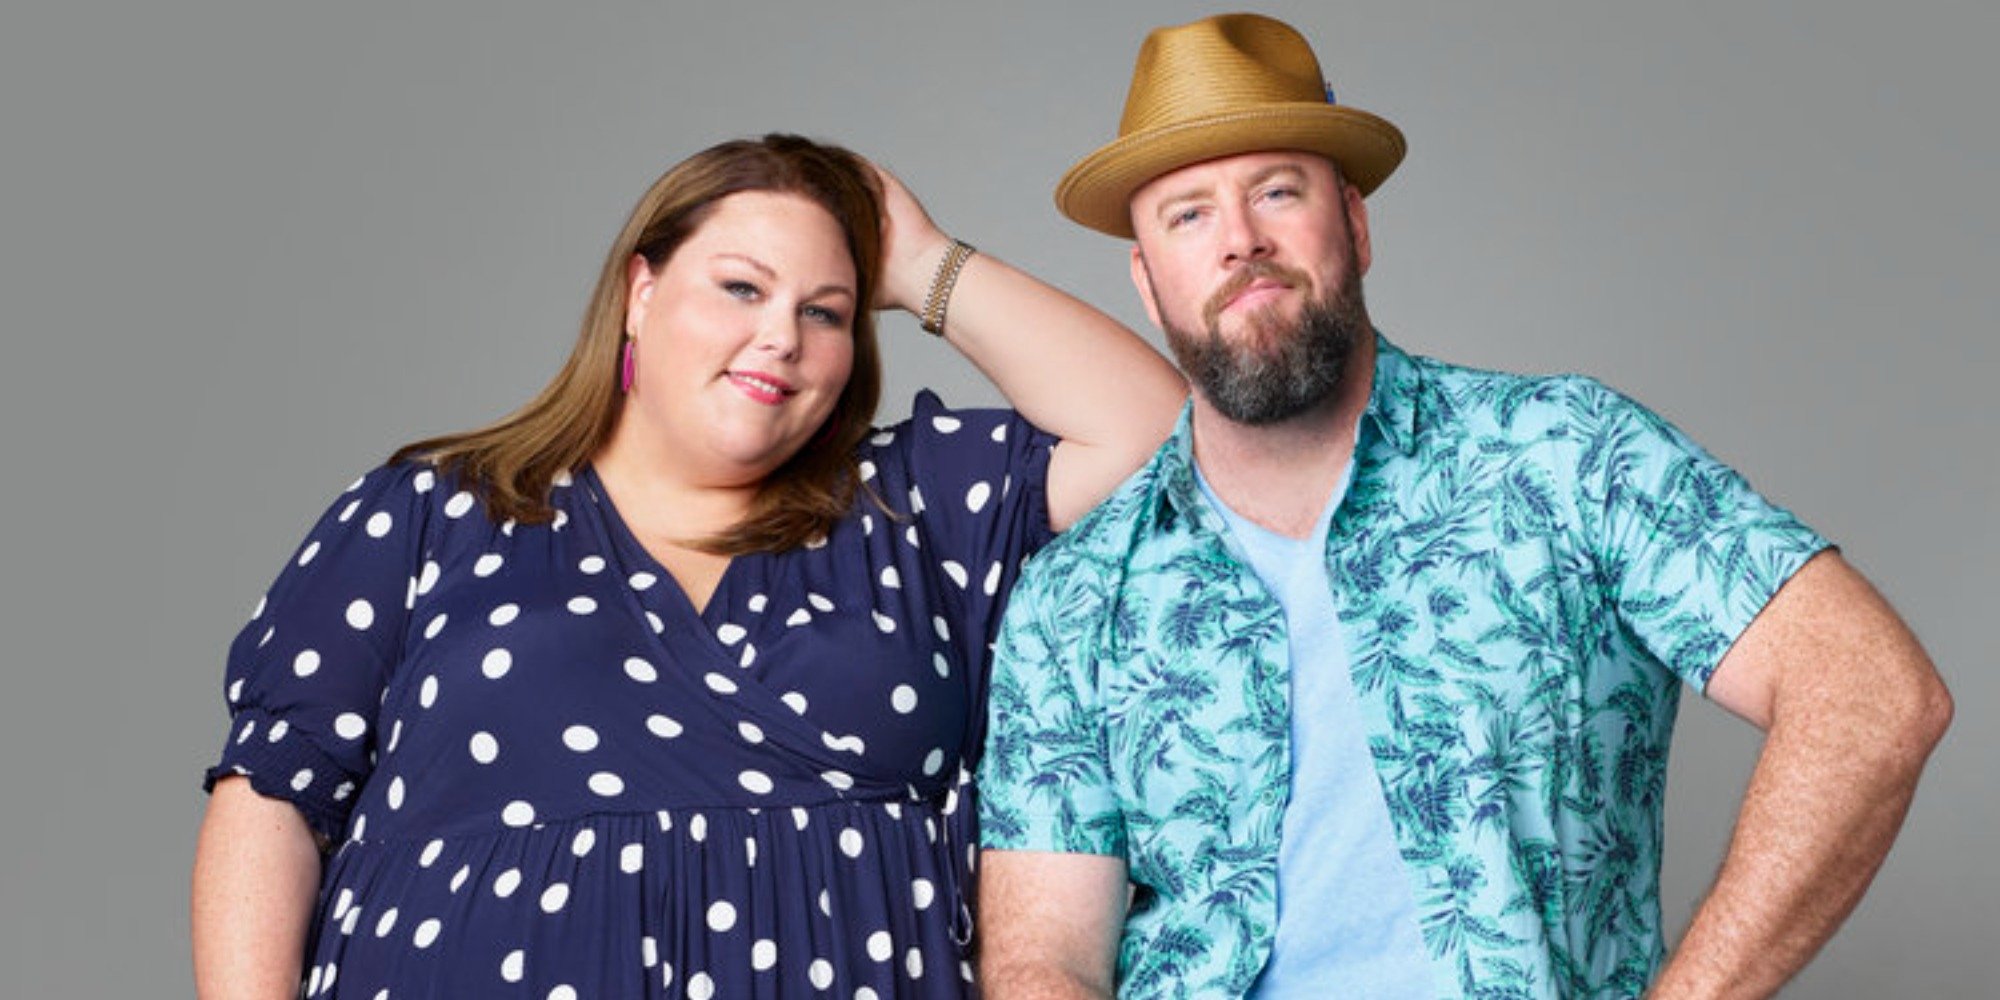 Chrissy Metz and Chris Sullivan pose for a publicity photo.